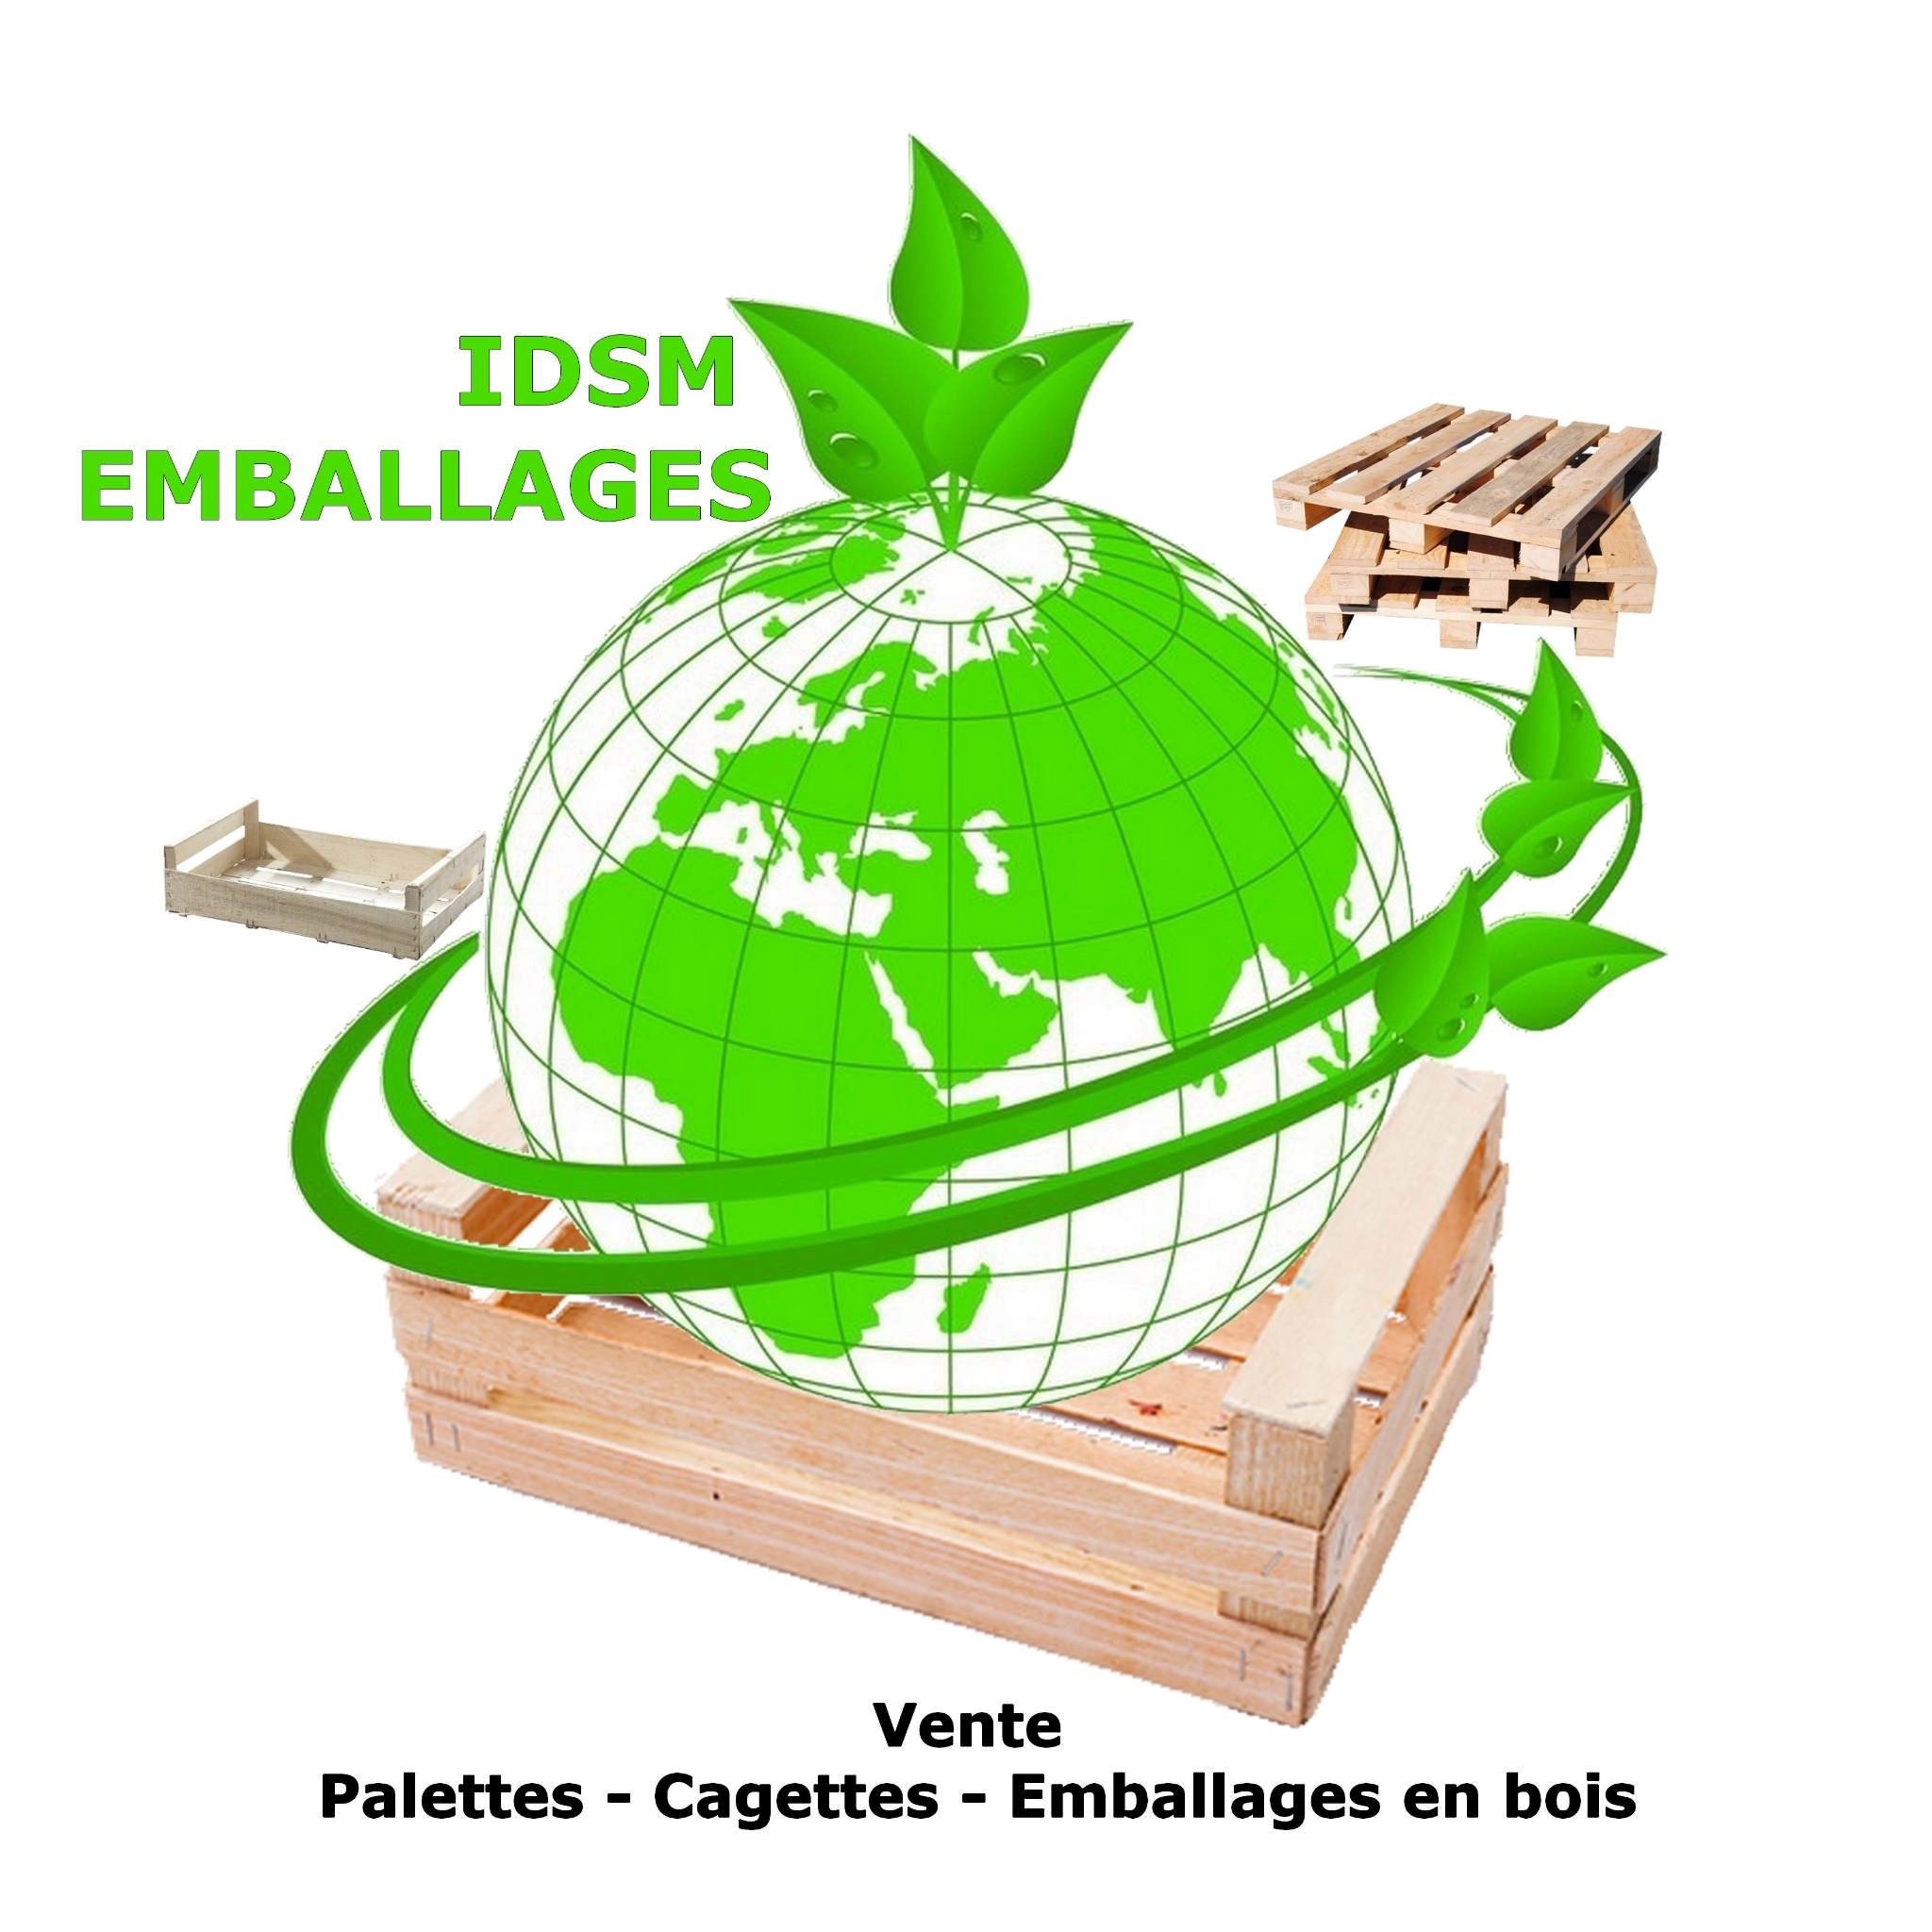 idsm_emballages